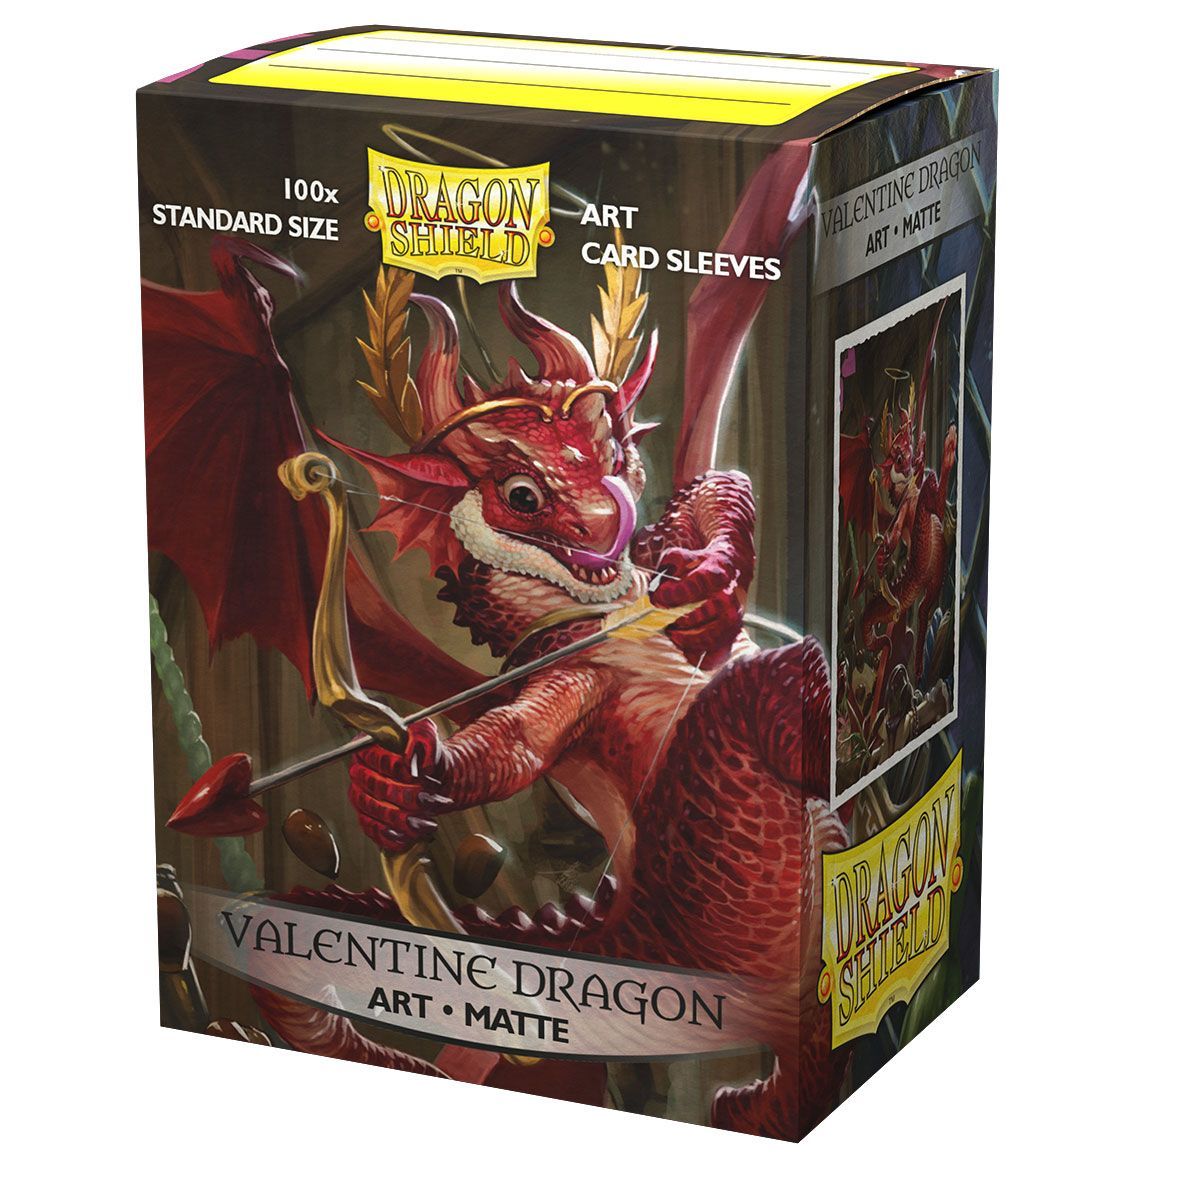 Dragon Shield Sleeve Art Matte Standard Size 100pcs Limited Edition 10th series "Valentine Dragon 2020"-Dragon Shield-Ace Cards & Collectibles